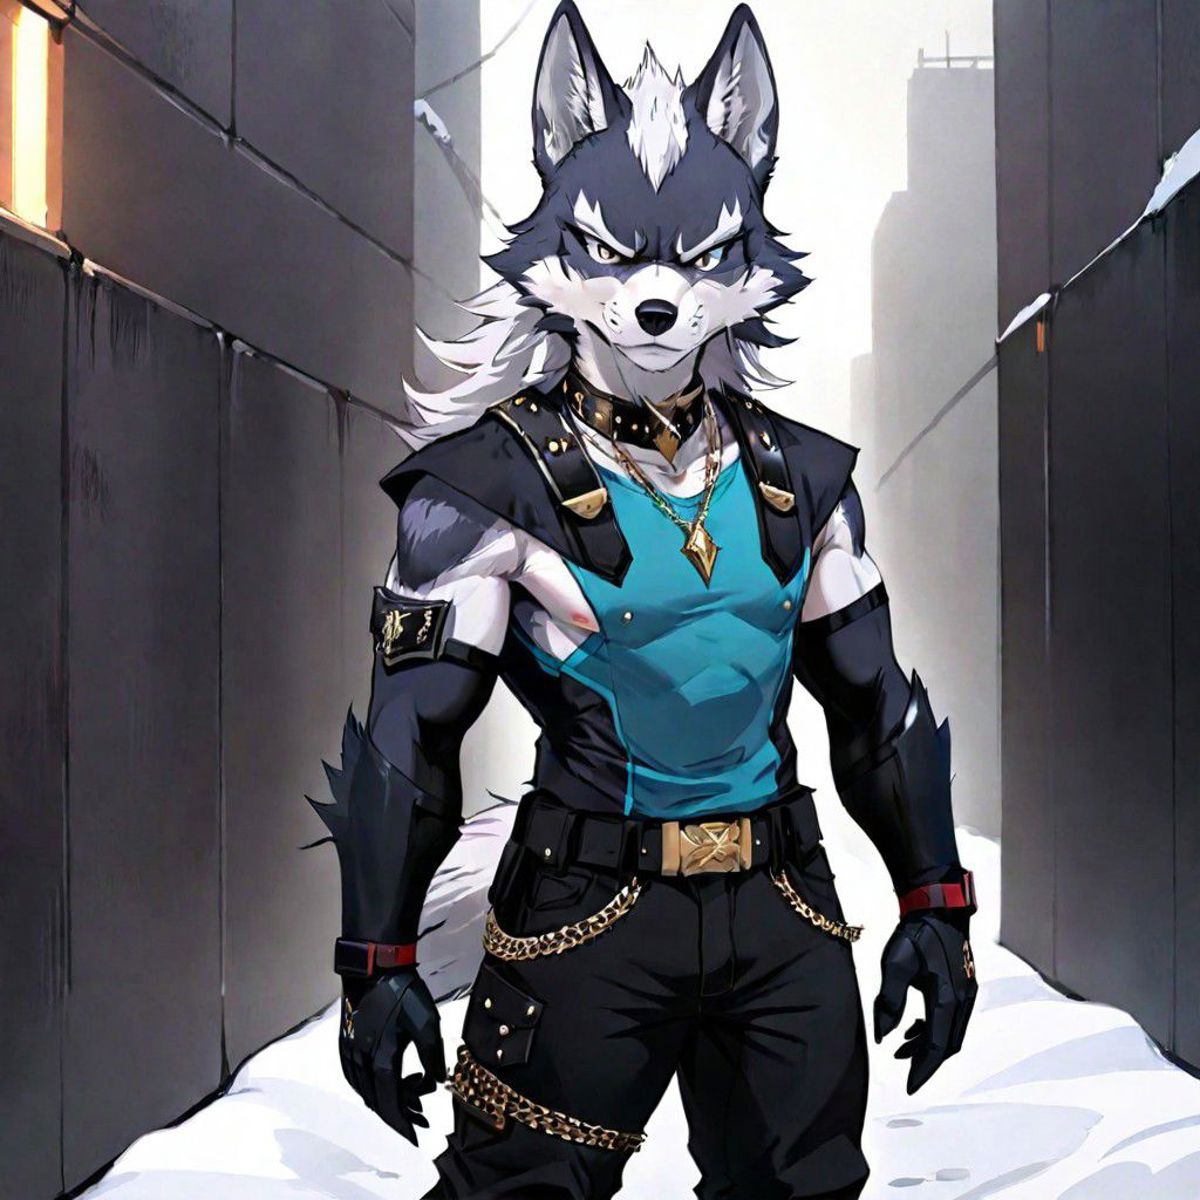 Wolf O' Donnel Super Smash Bro Brawl image by FoxMccloud2022